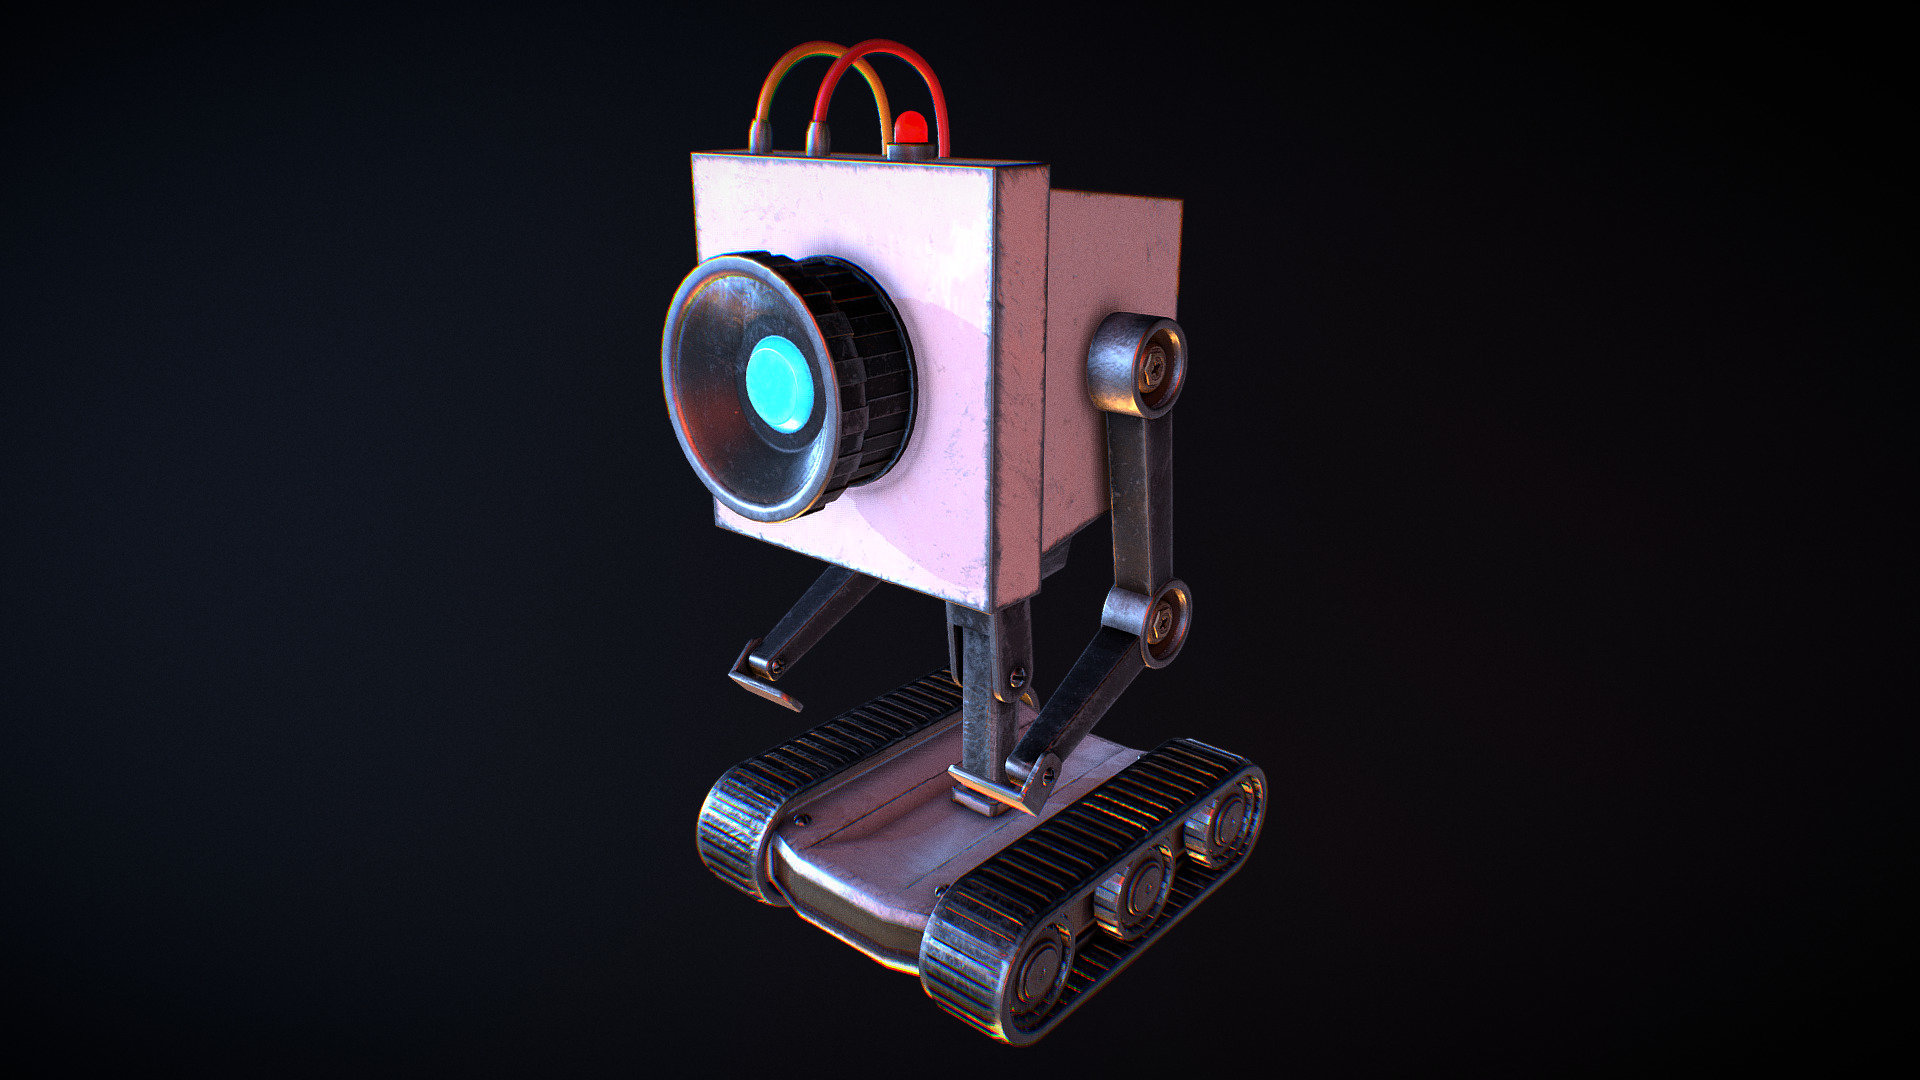 Rick And Morty Pass The Butter Robot V2 3d Model By Hal 9000 231ef0a Sketchfab